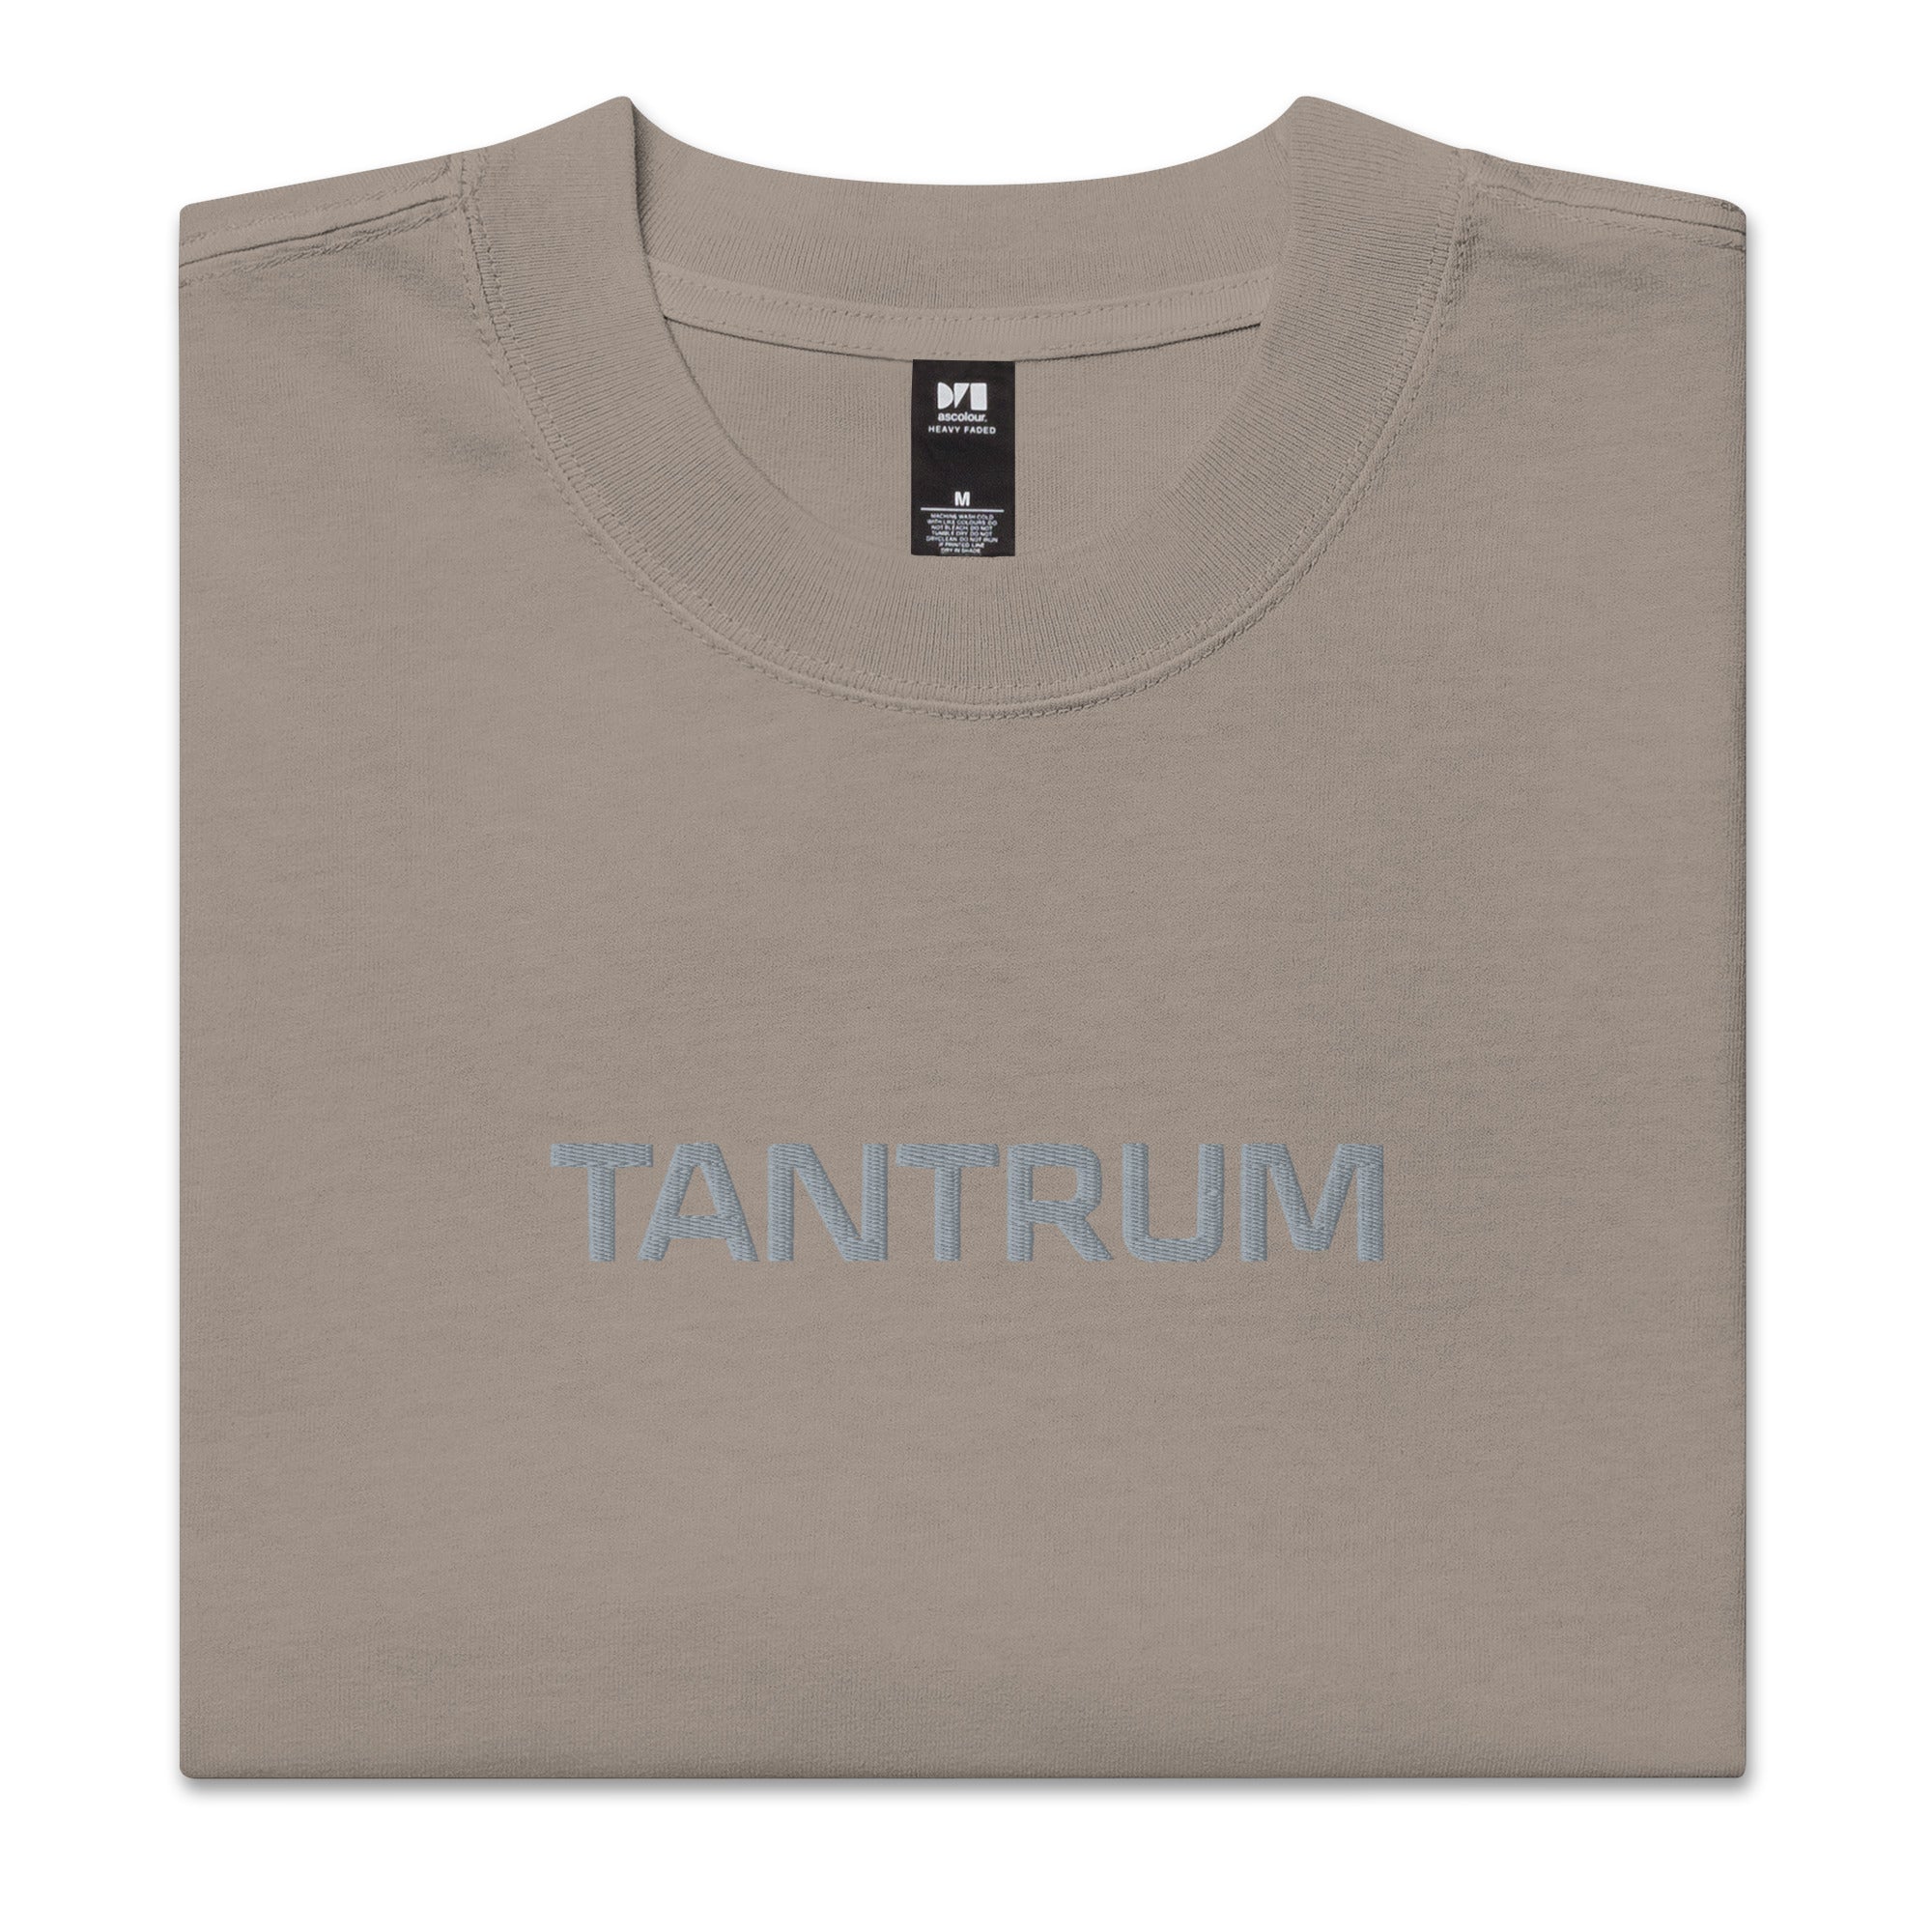 Tantrum Embroidered Oversized Faded T-shirt